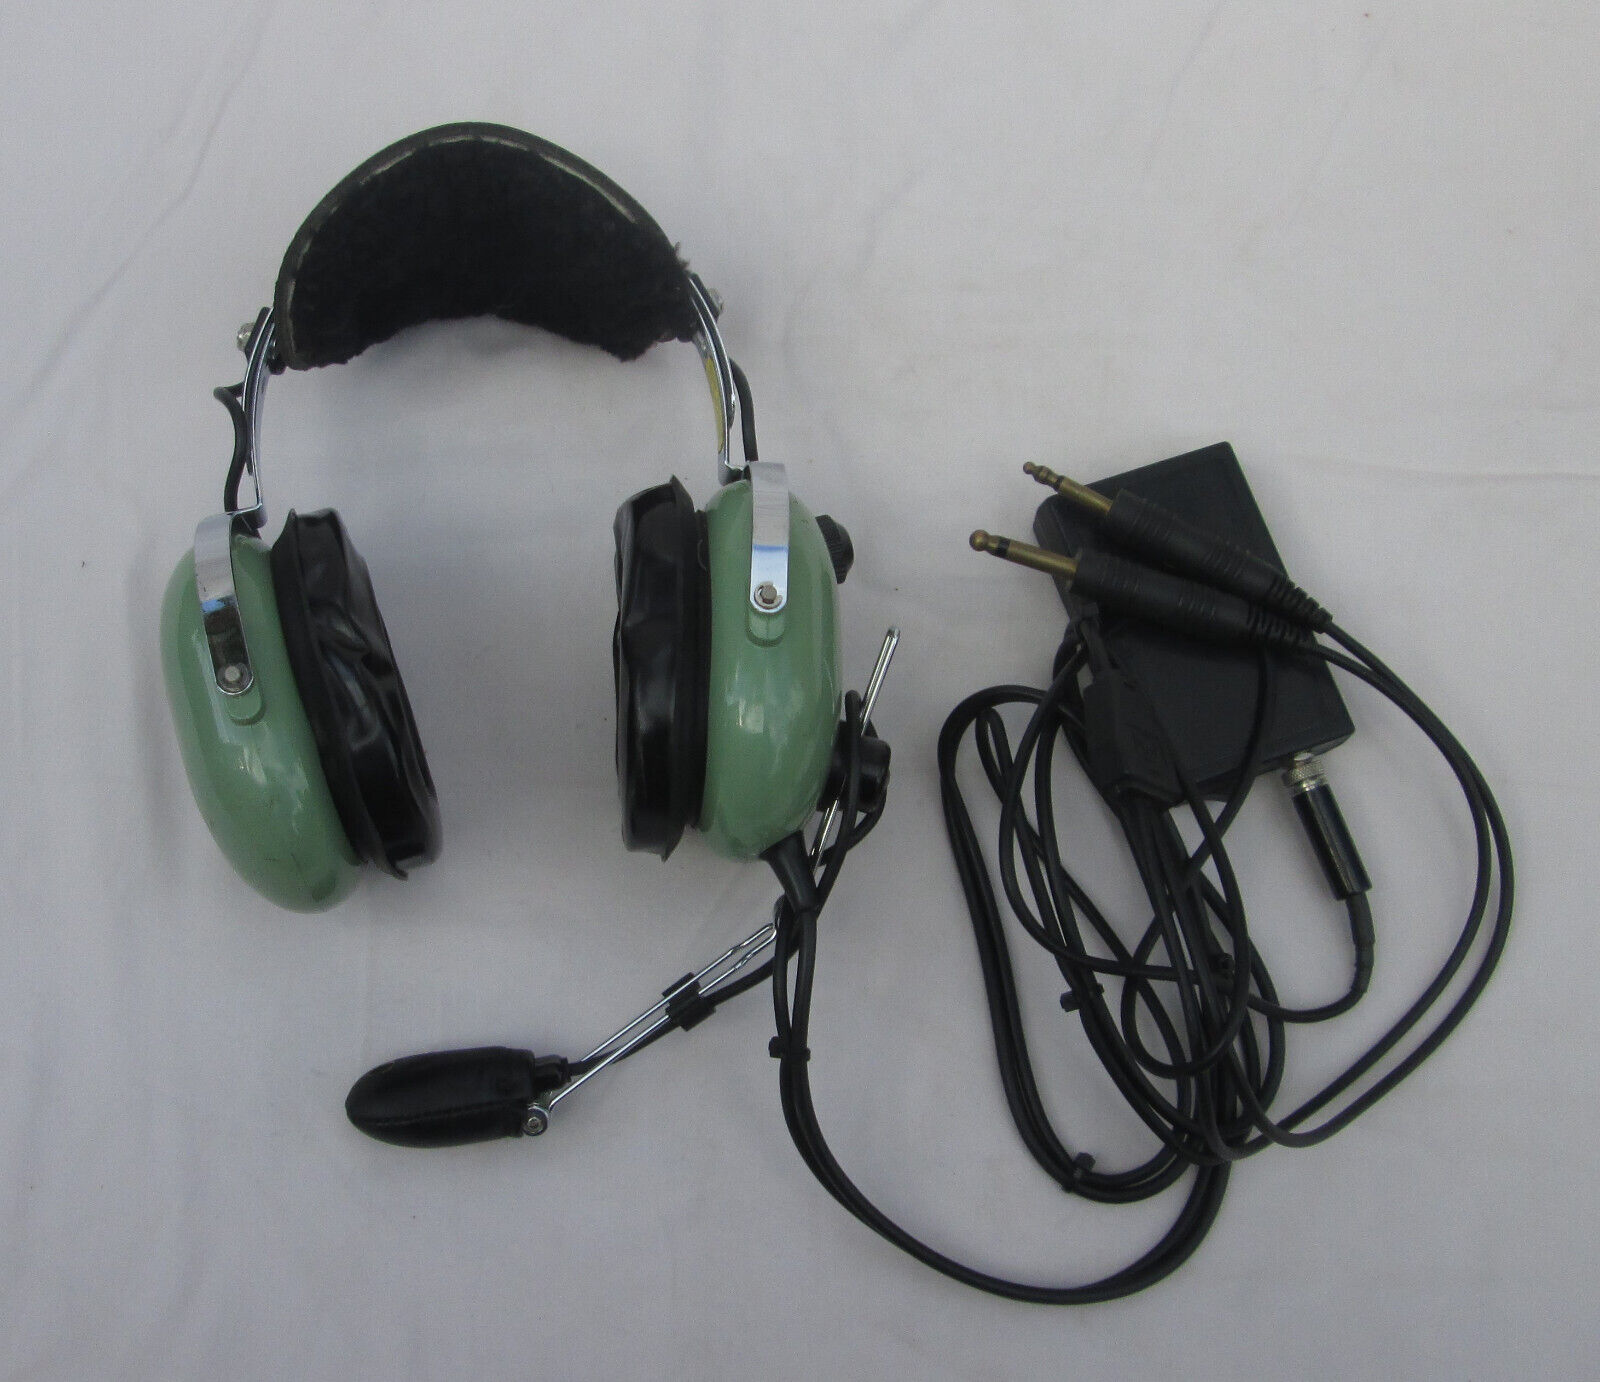 David Clark Aviation Headset with Headsets, Inc. noise cancelling